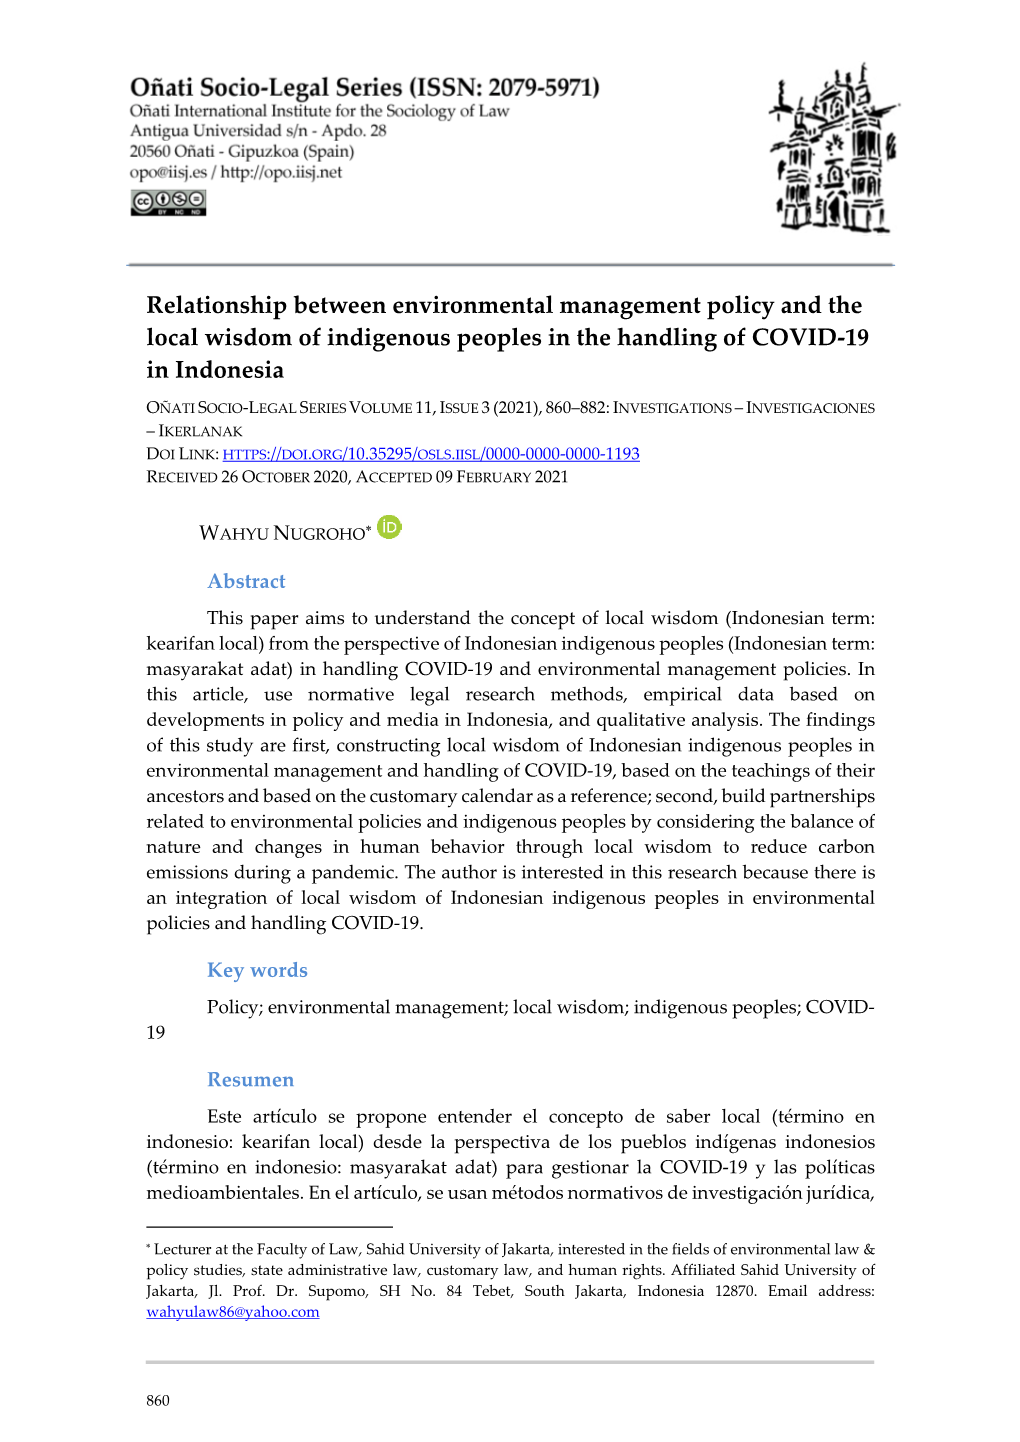 Relationship Between Environmental Management Policy and the Local Wisdom of Indigenous Peoples in the Handling of COVID-19 in Indonesia